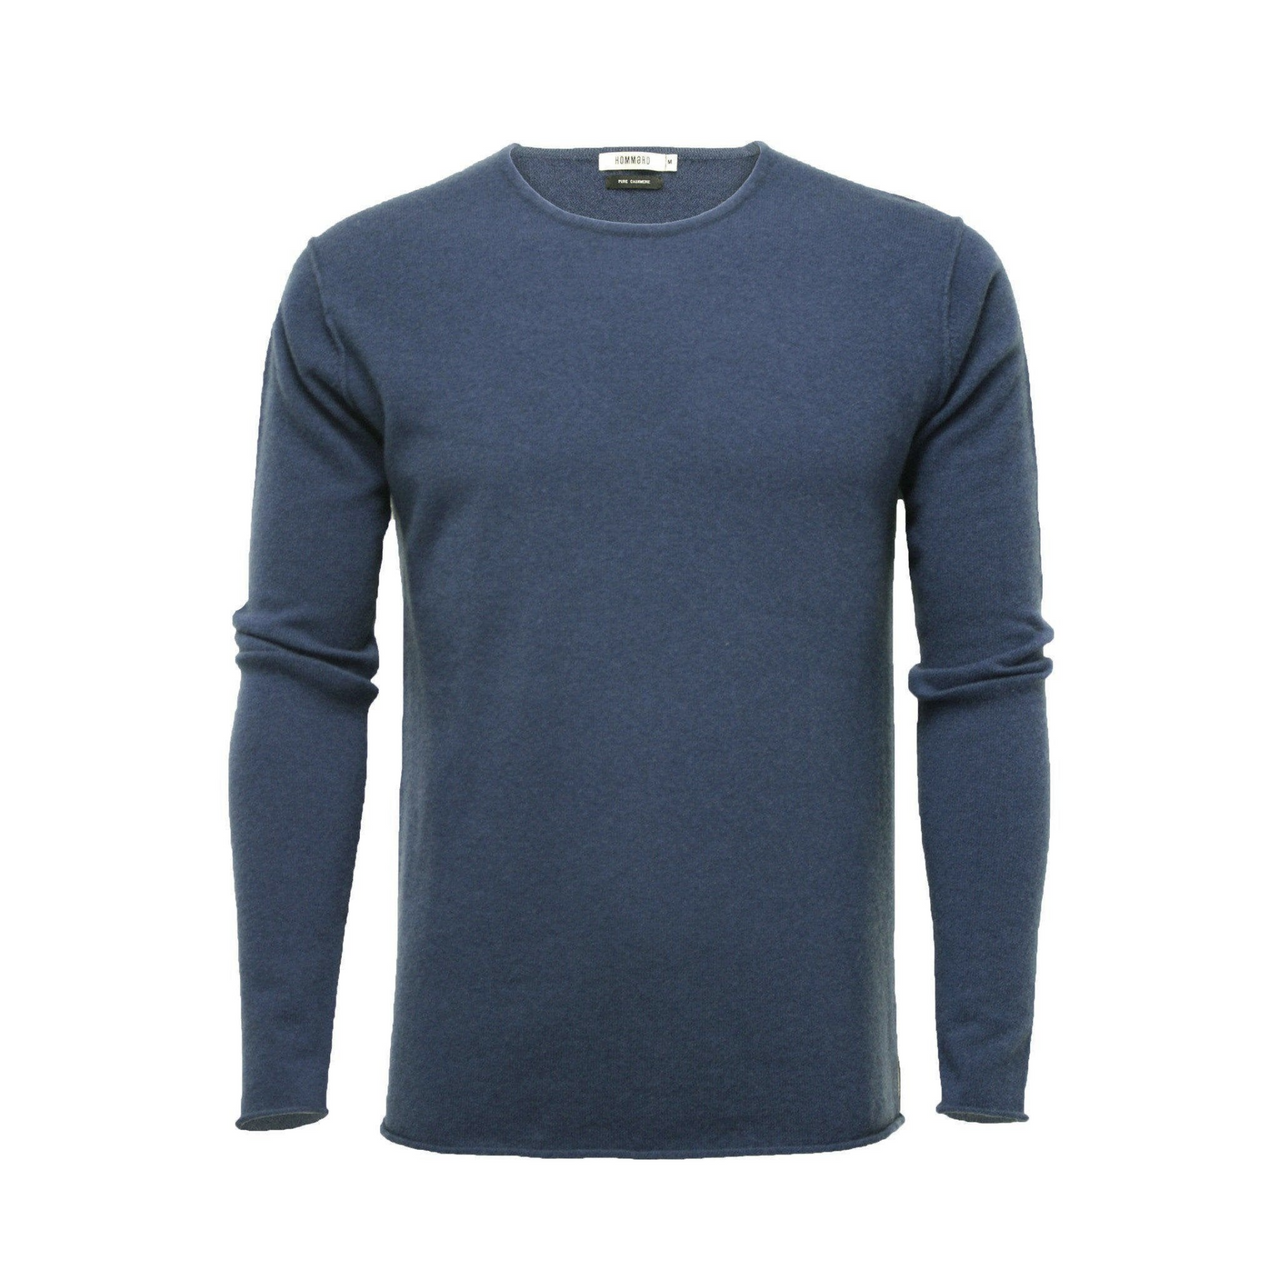 Jeans Cashmere Crew Neck Sweater Ripley